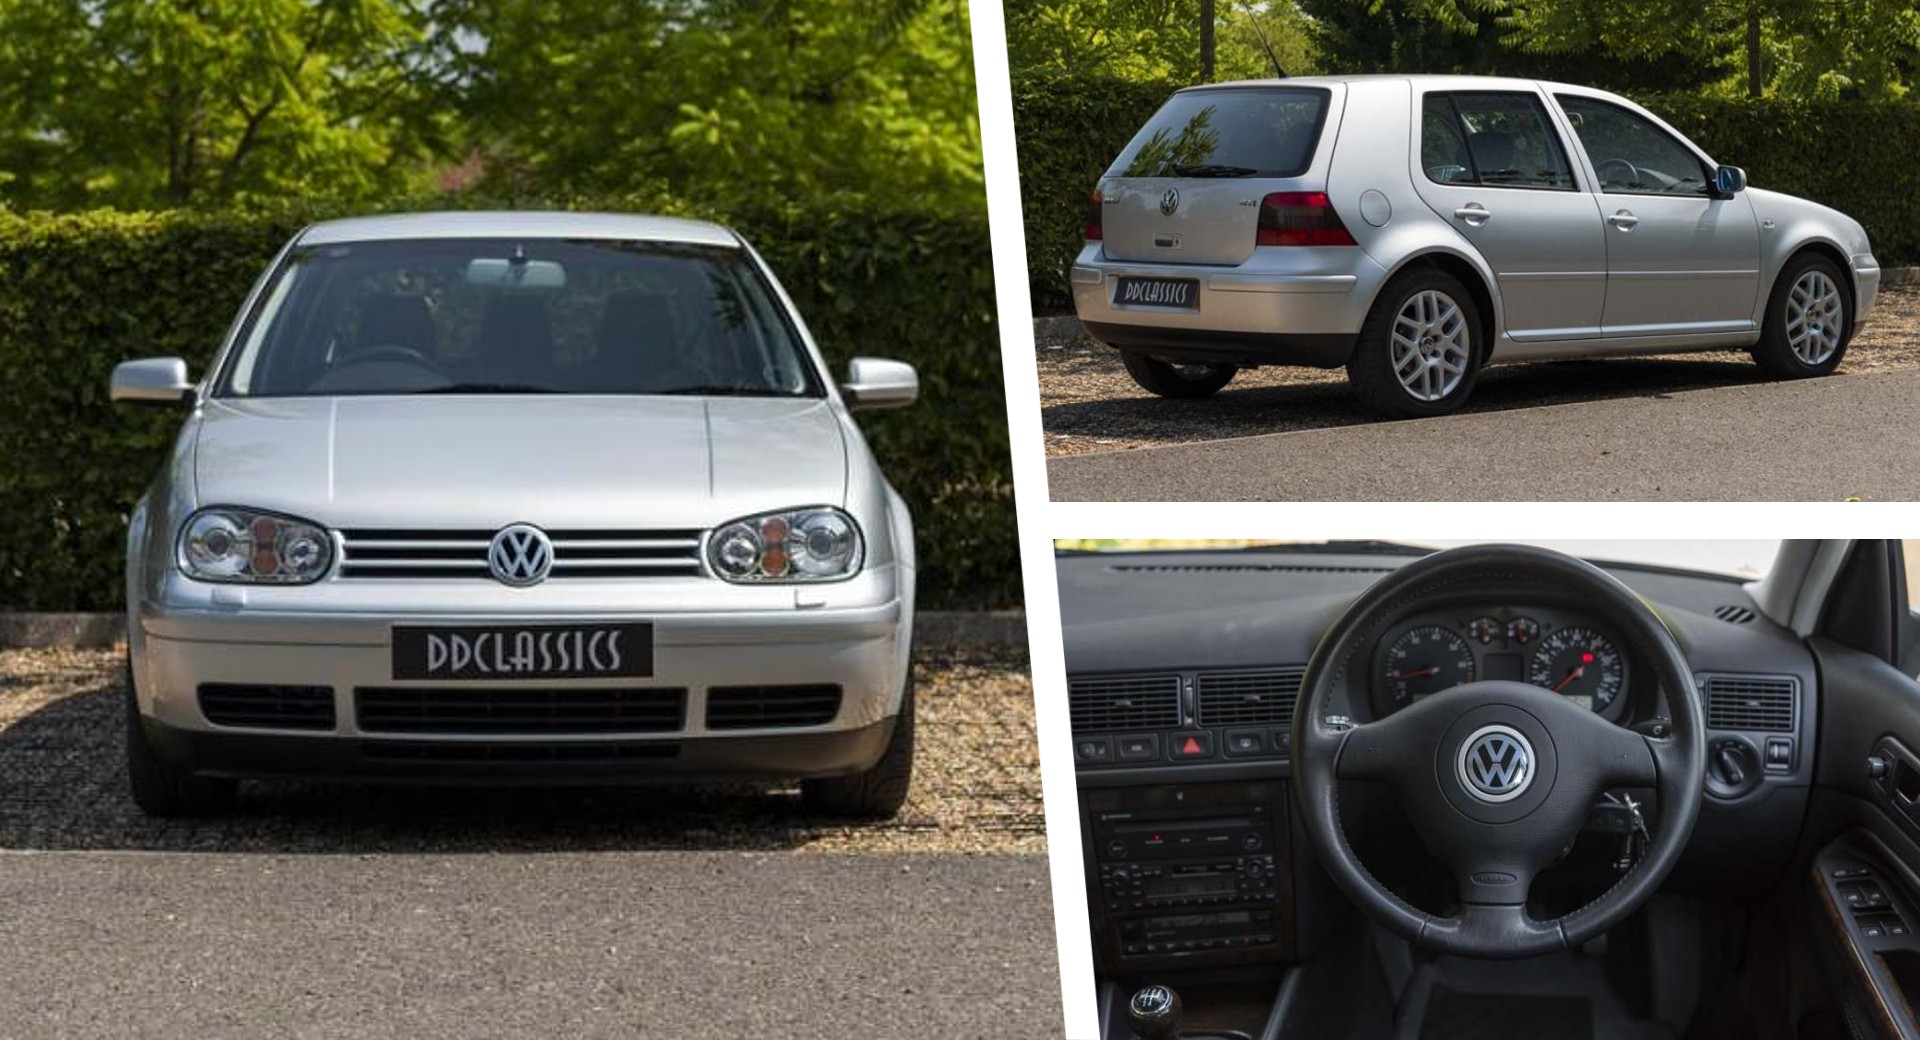 The Volkswagen Golf 4 TDI - a excellent auto, although you must